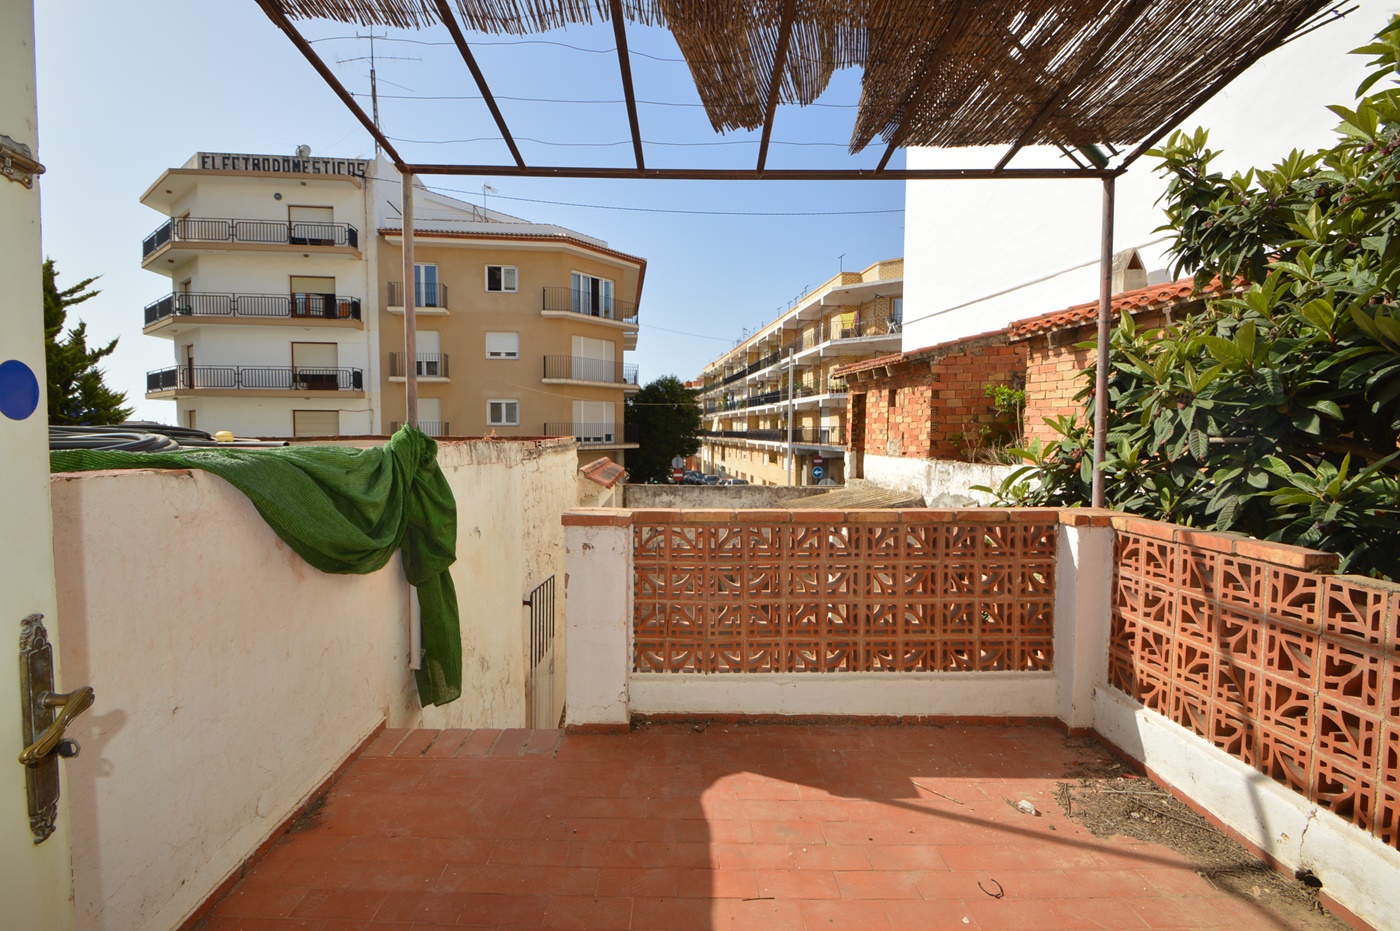 Ground Floor Townhouse with private garden in the Old Town